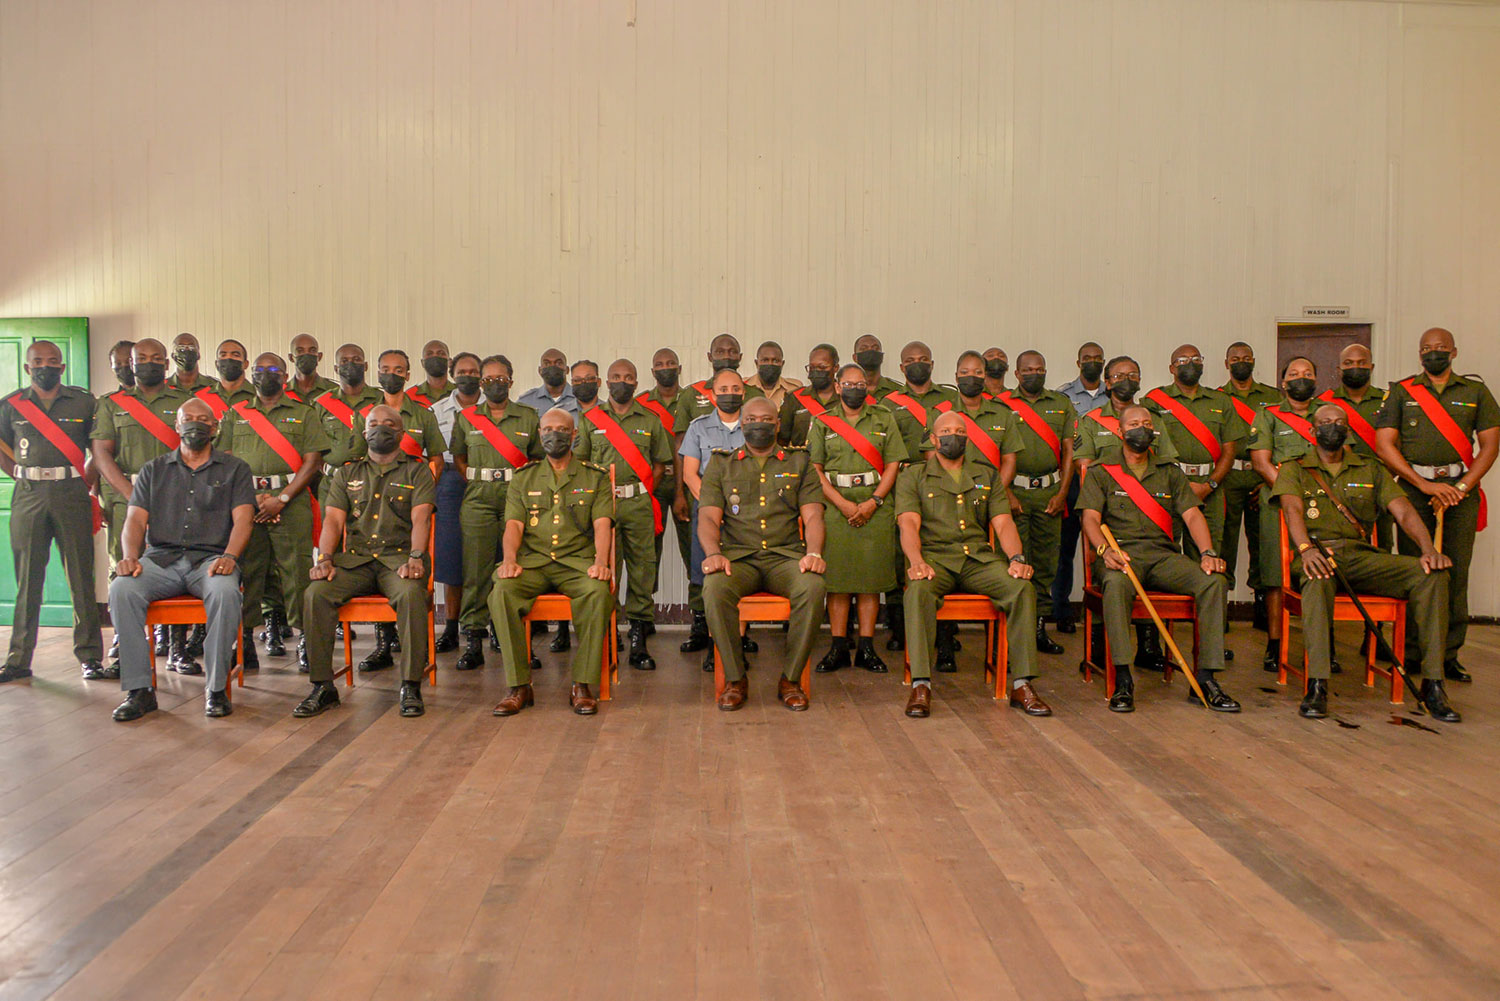 Inspector-General, Colonel Kenlloyd Roberts (centre front) flanked on his left by Commanding Officer Training Corps, Lieutenant Colonel Collin Henry and on his right by Officer Commanding SLC, Major Andre Cush, along with staff and students of SLC 10